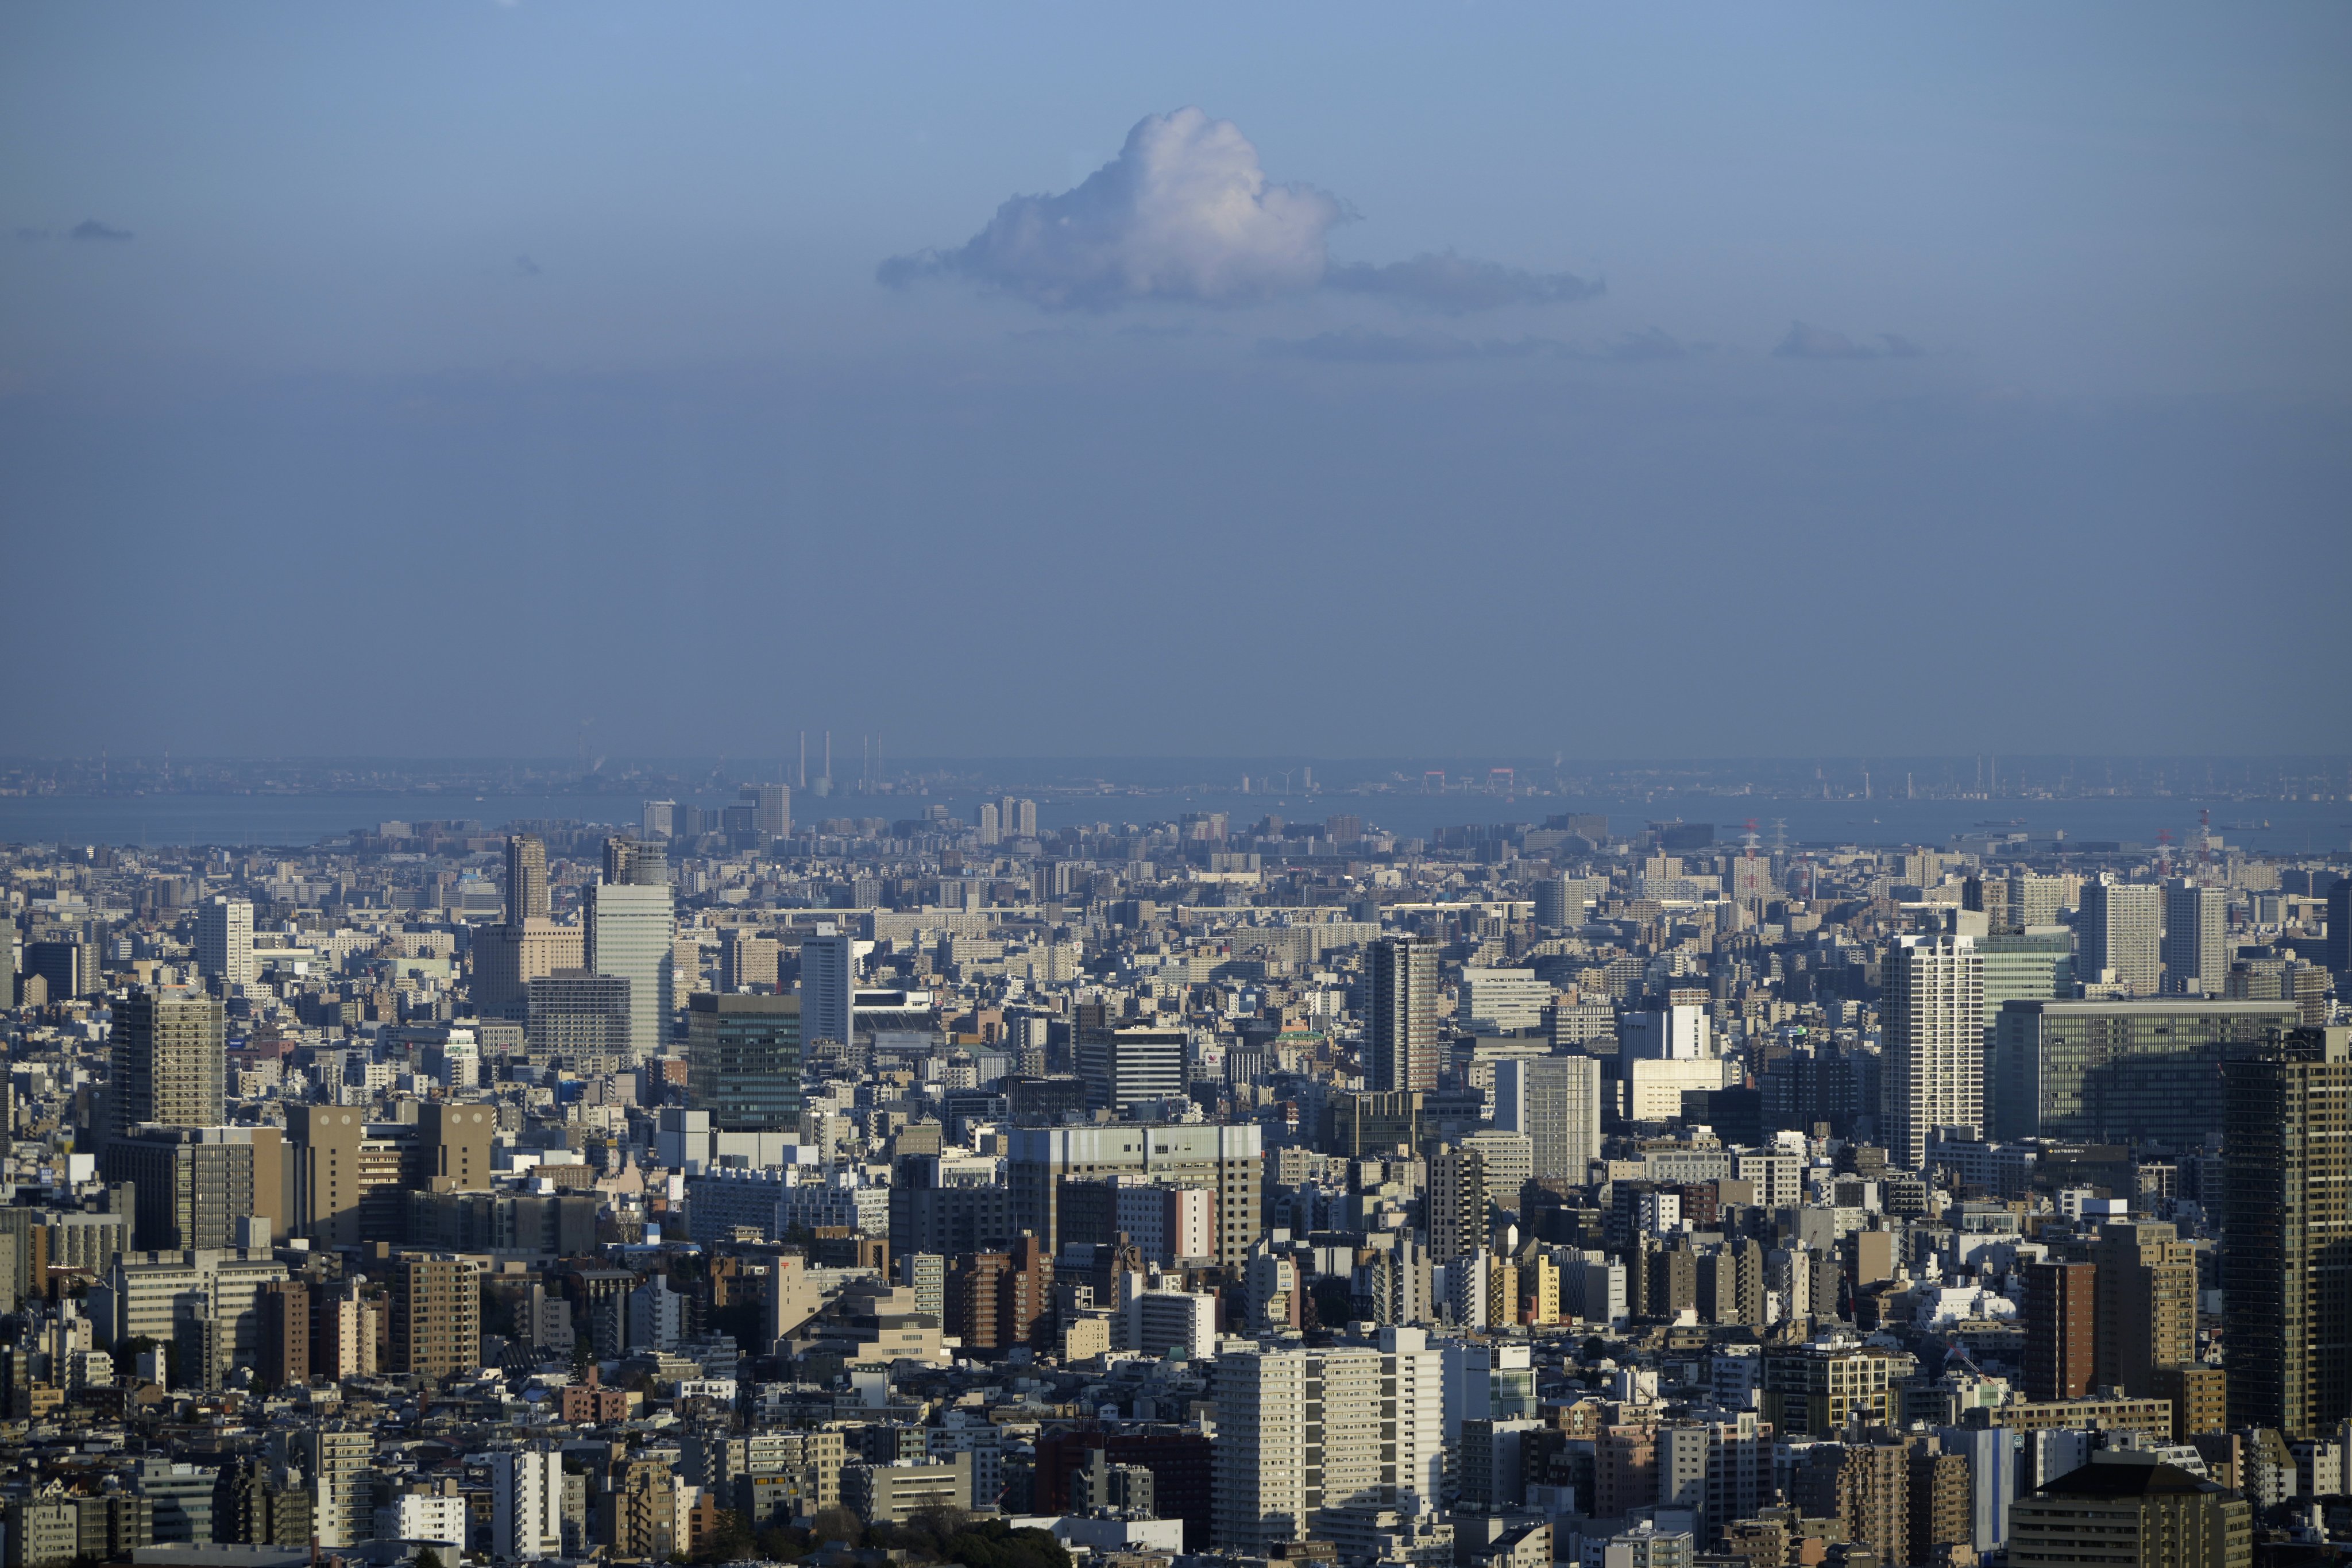 A cloud is seen over the Tokyo cityscape on February 8. Officials and analysts talking up the economy may have succeeded in projecting an image of renewed vigour, but many challenges remain. Photo: EPA-EFE